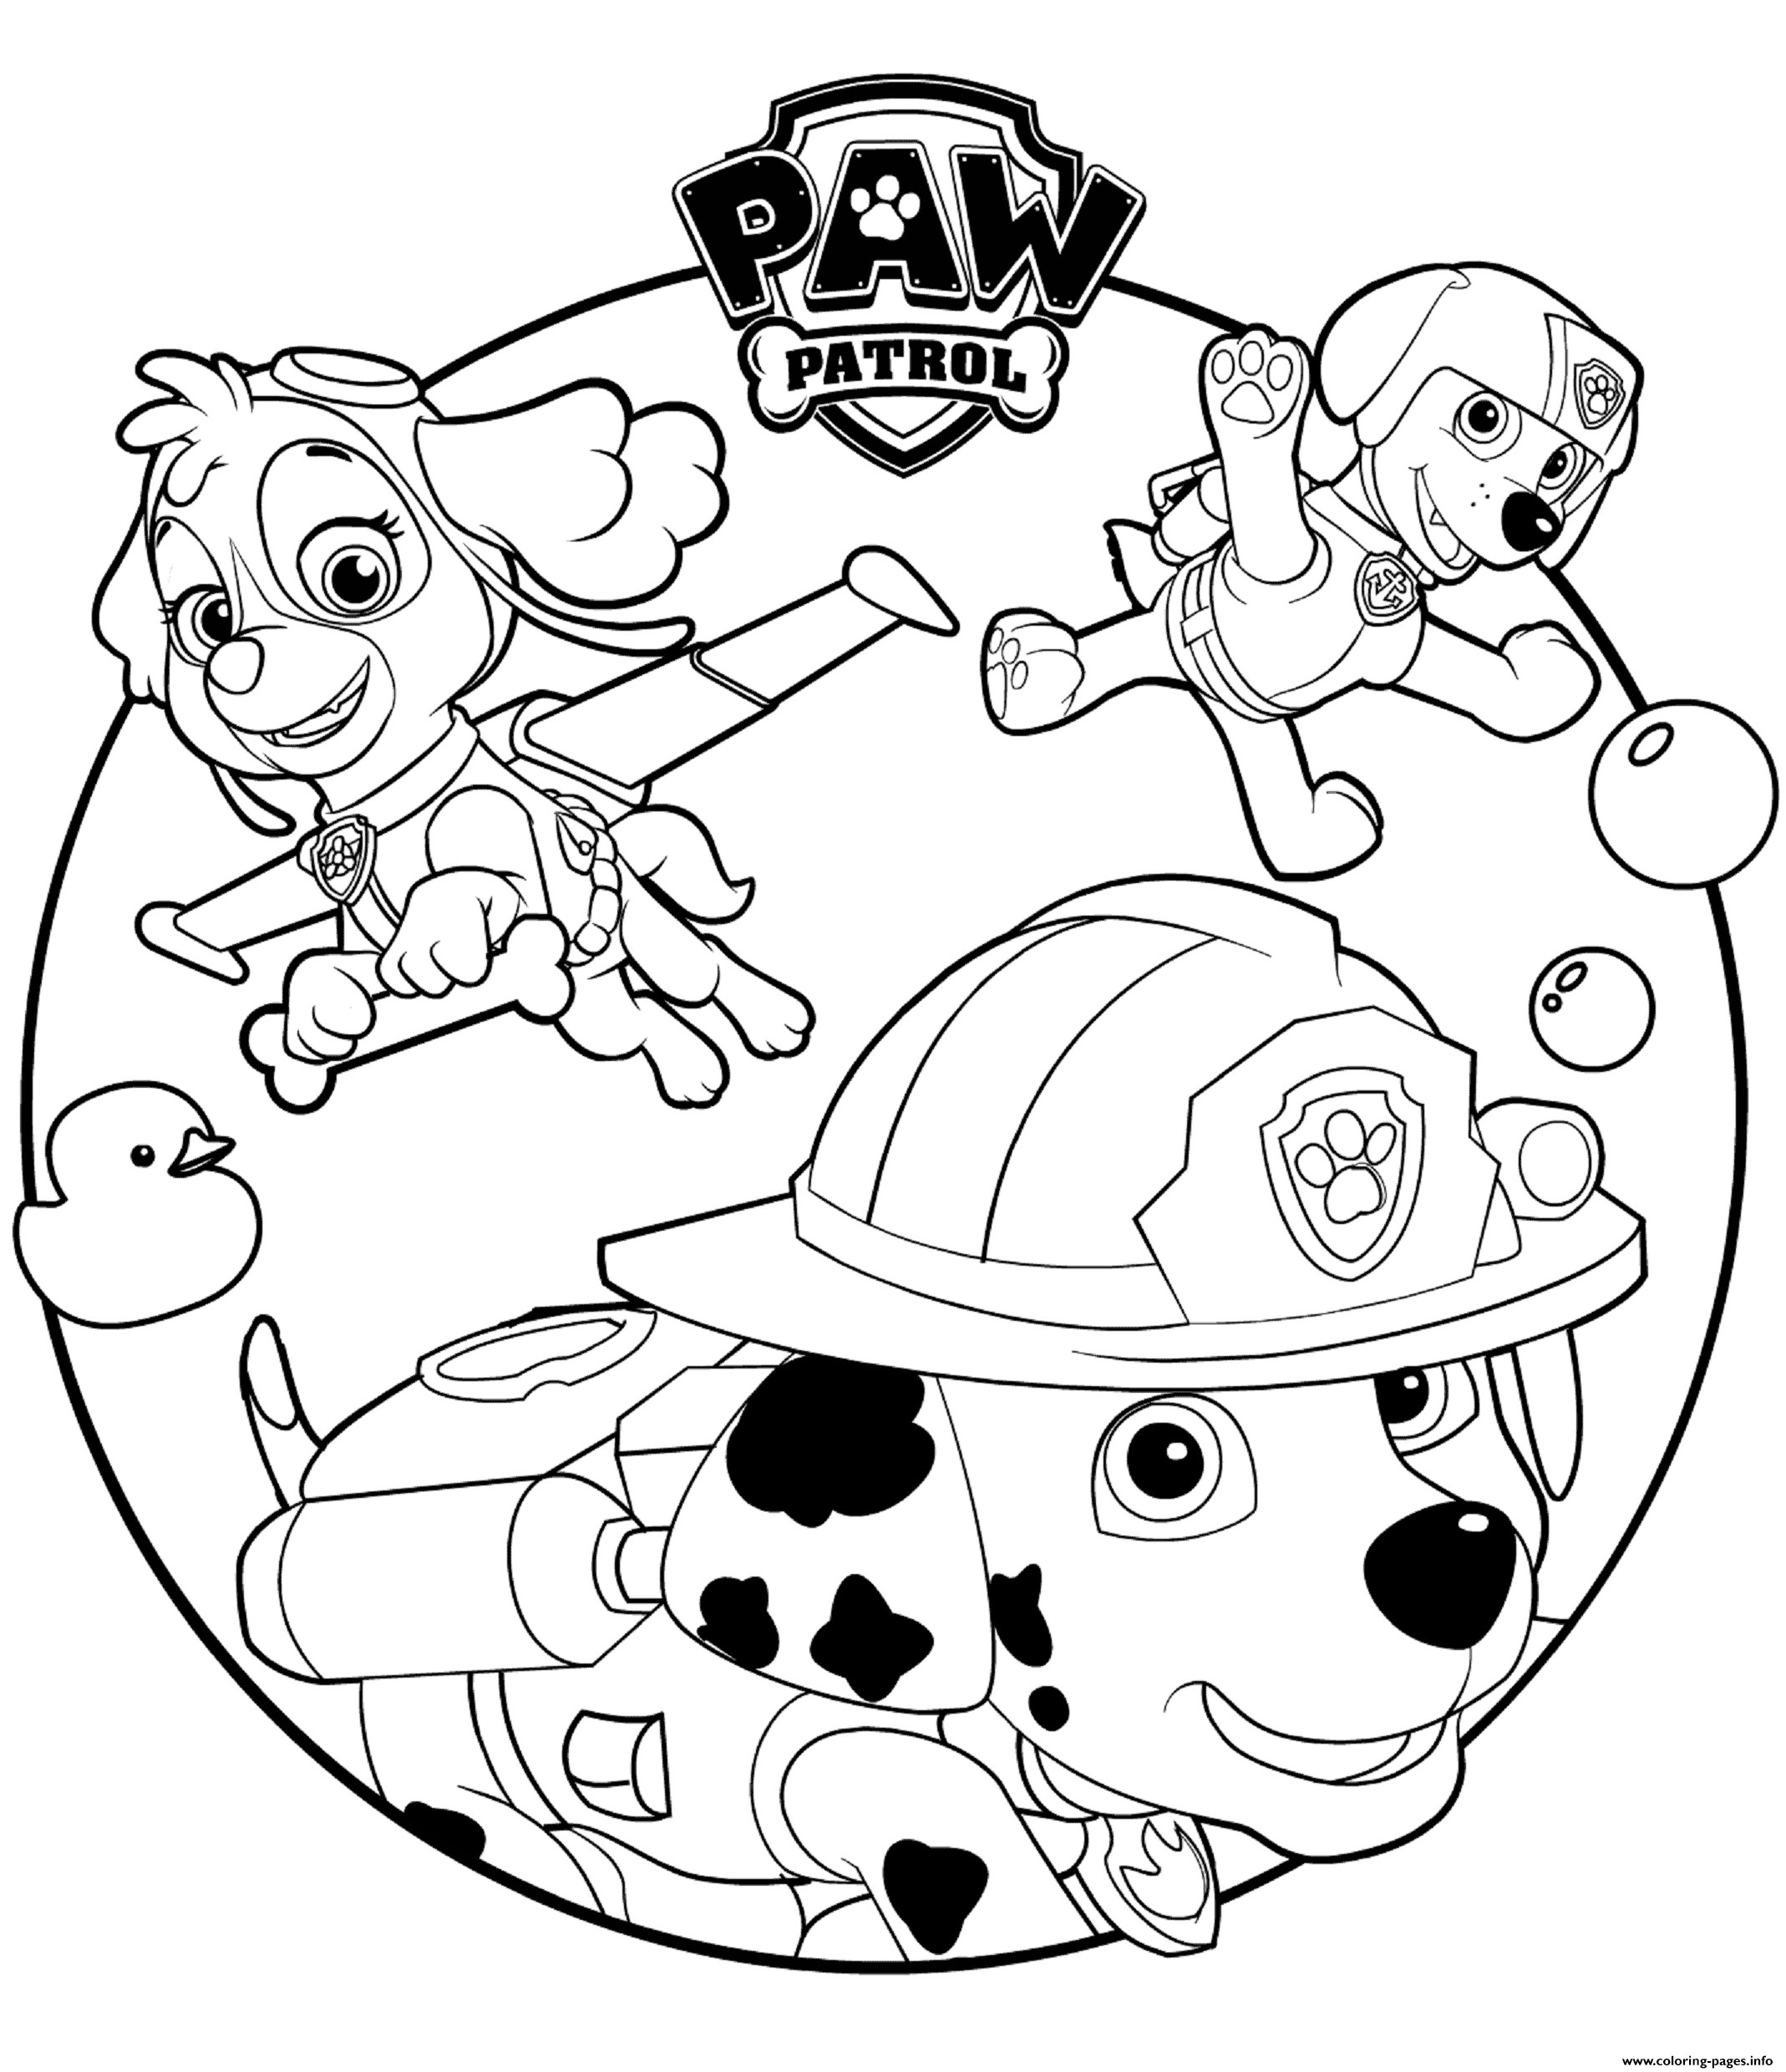 Paw Patrol Coloring Pages Marshall
 Skye Marshall And Rocky Paw Patrol Coloring Pages Printable